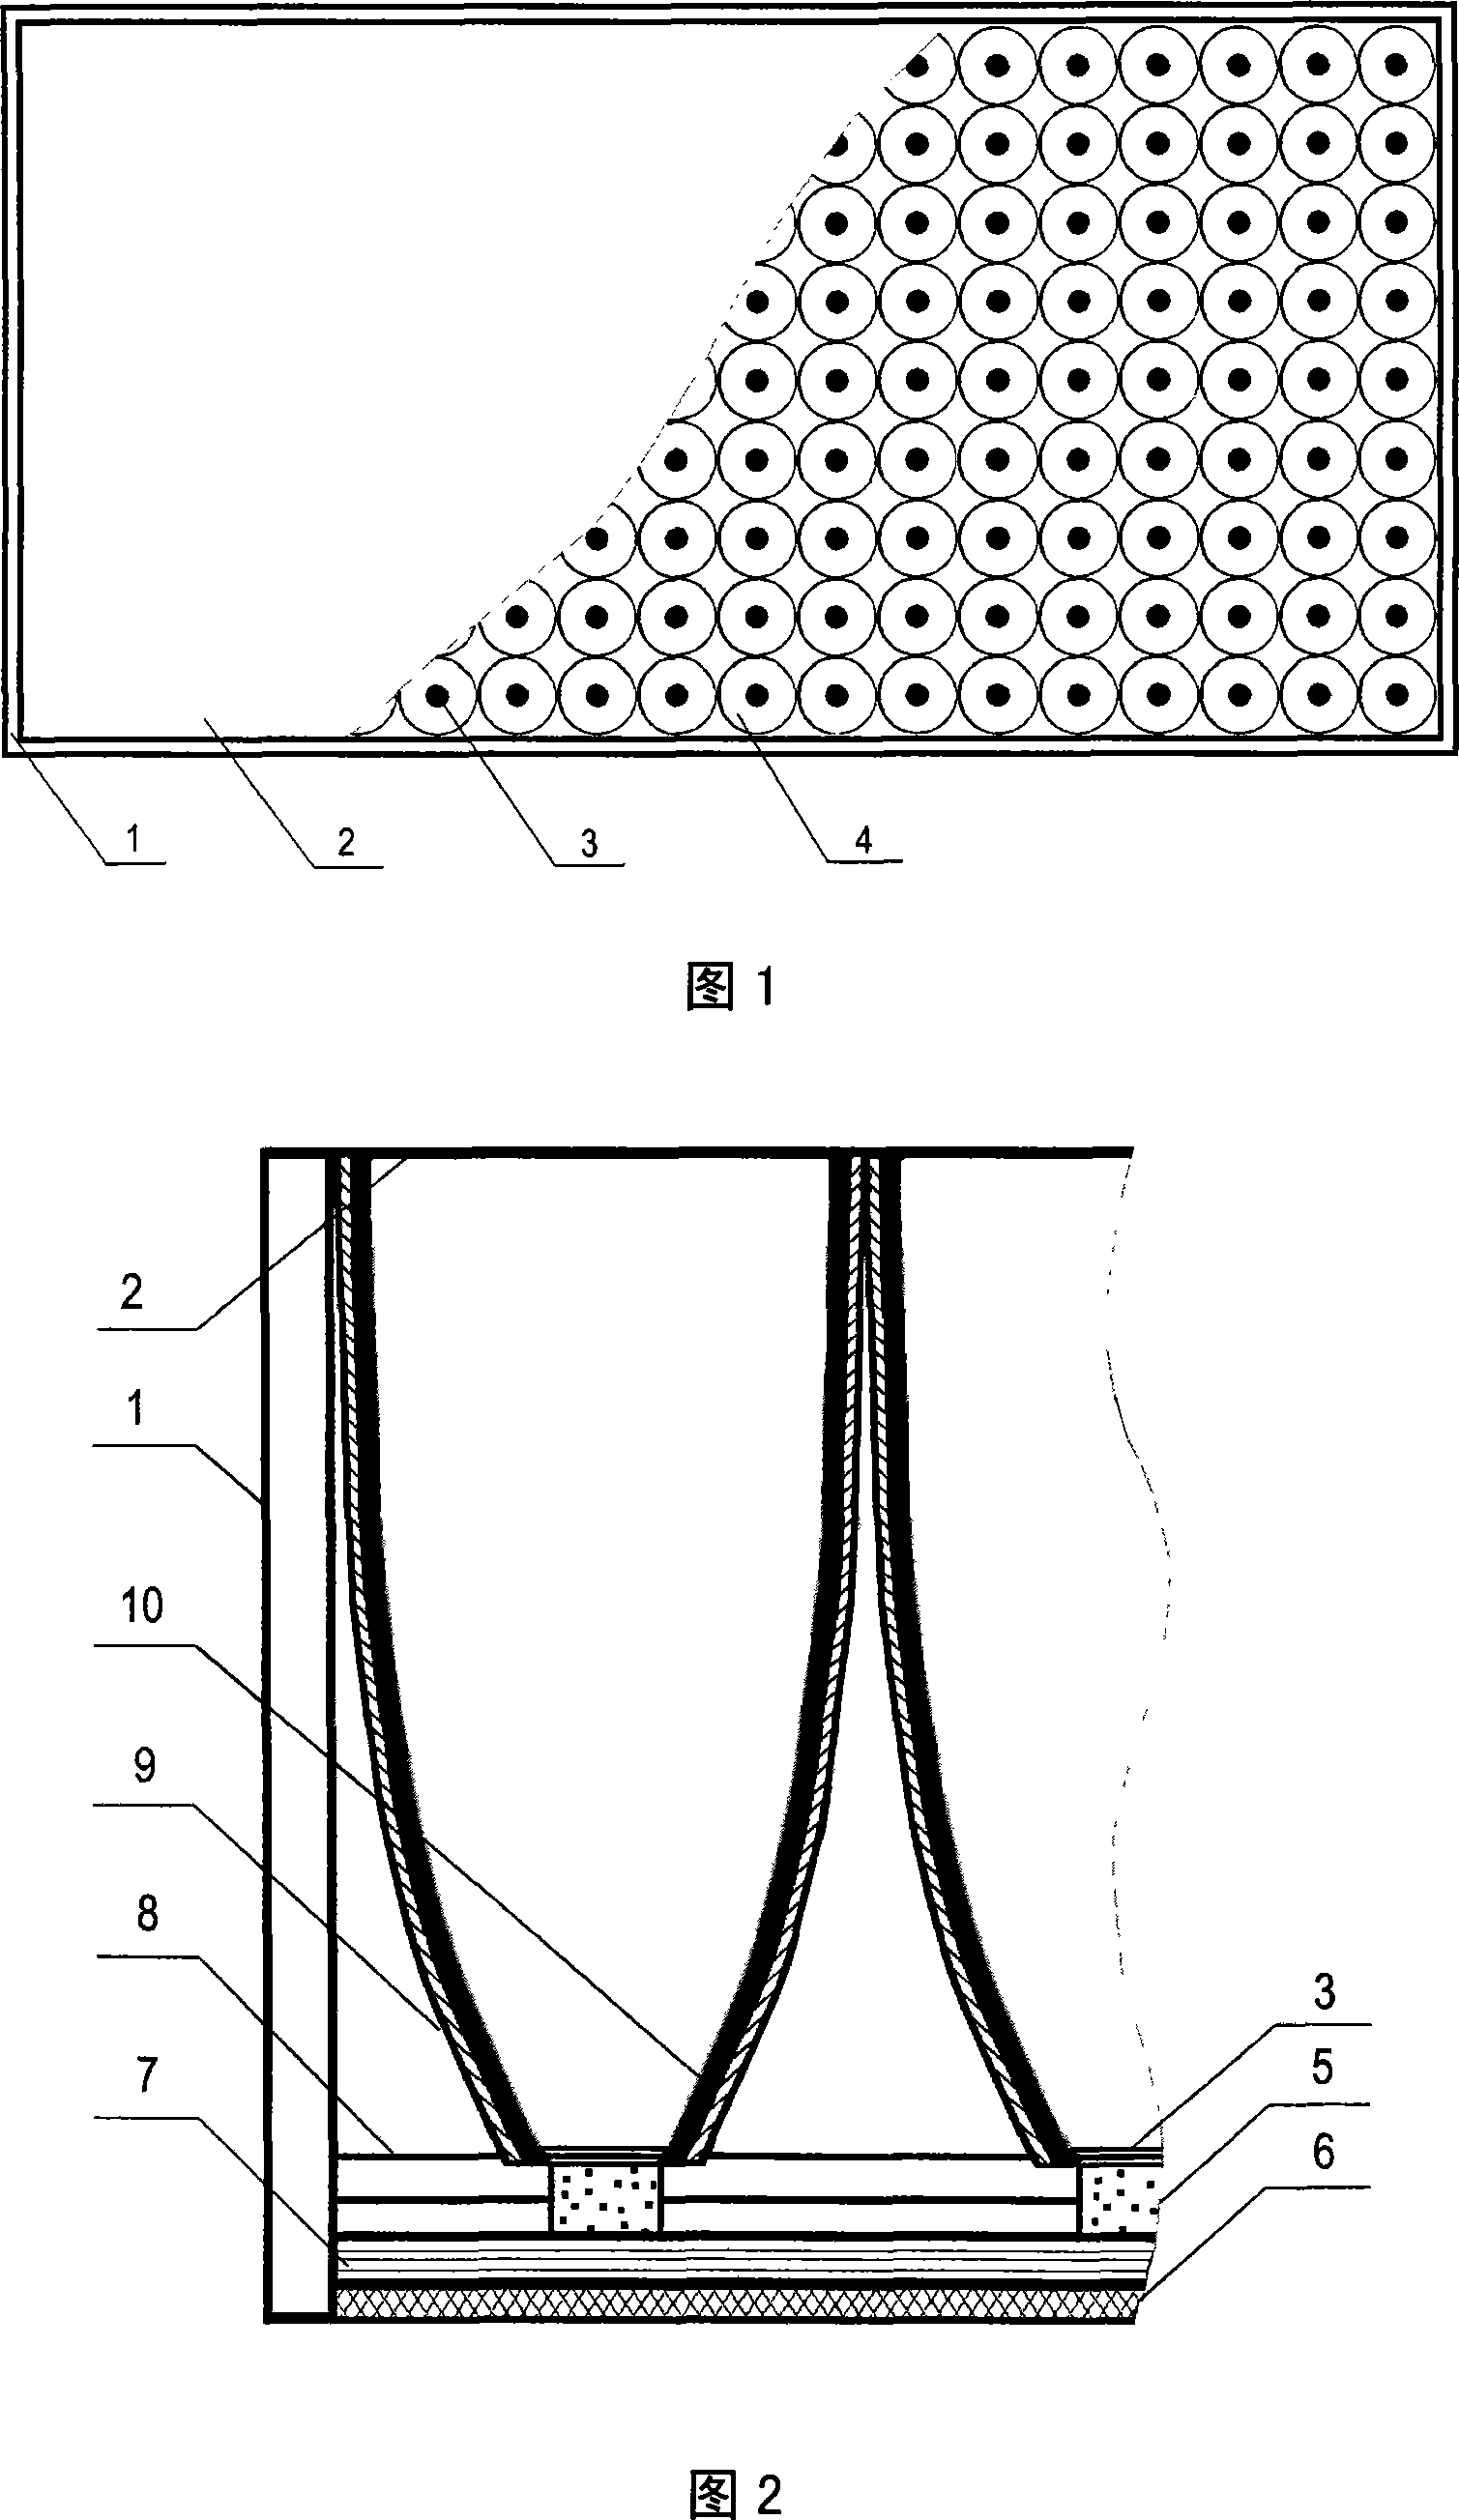 Condensing solar power generation plate reflected from composite parabola